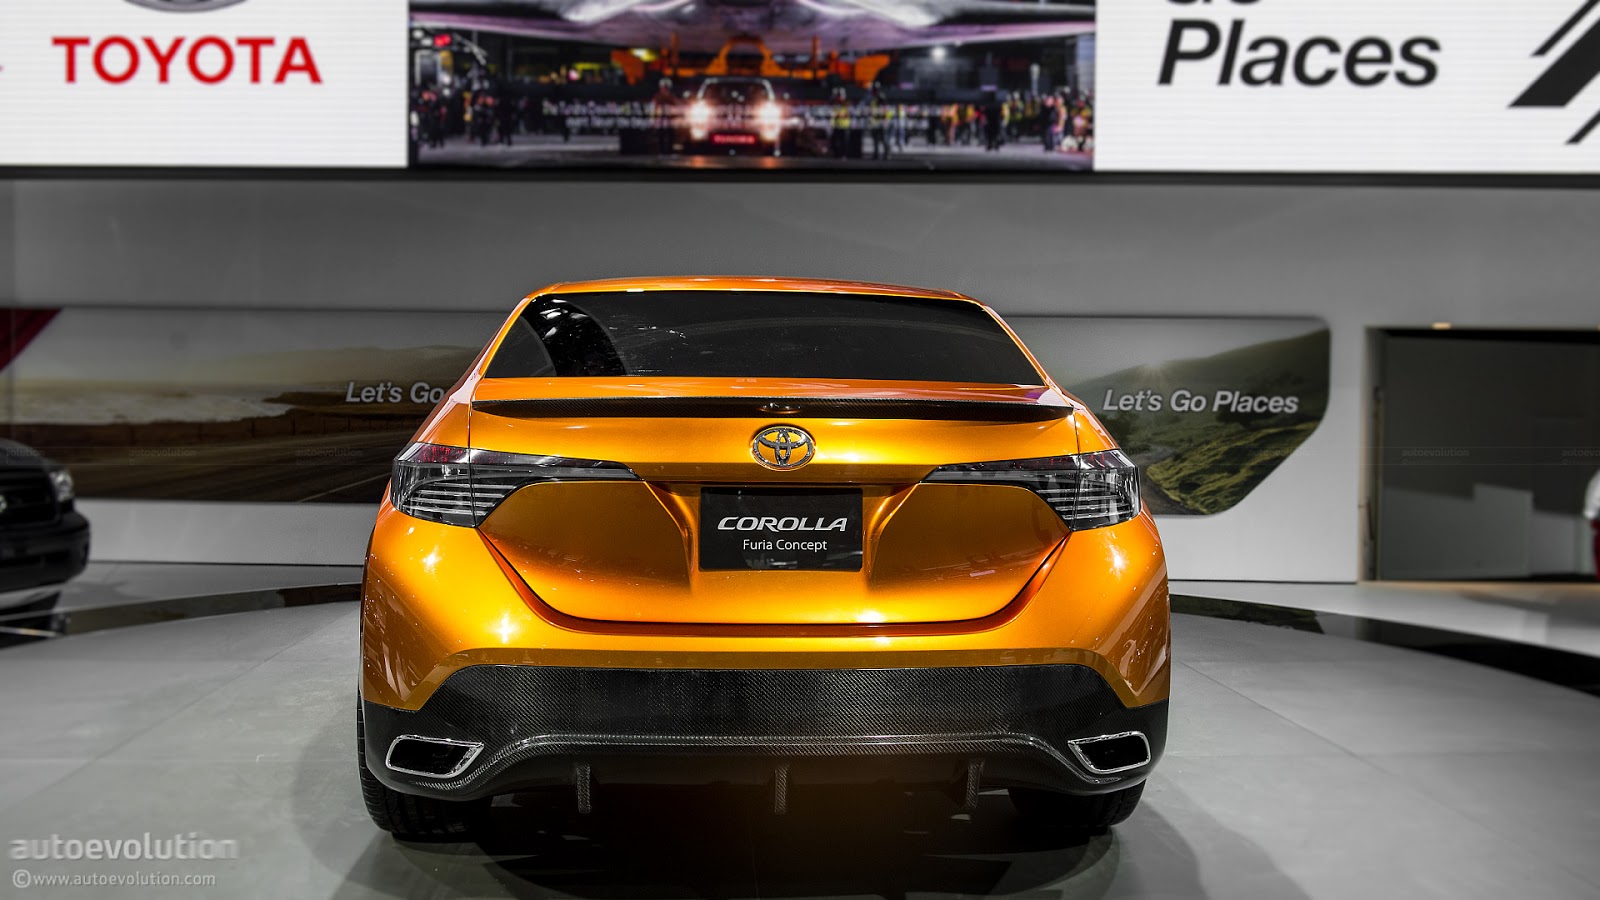 Toyota Corolla 2014 Previewed with Furia Concept